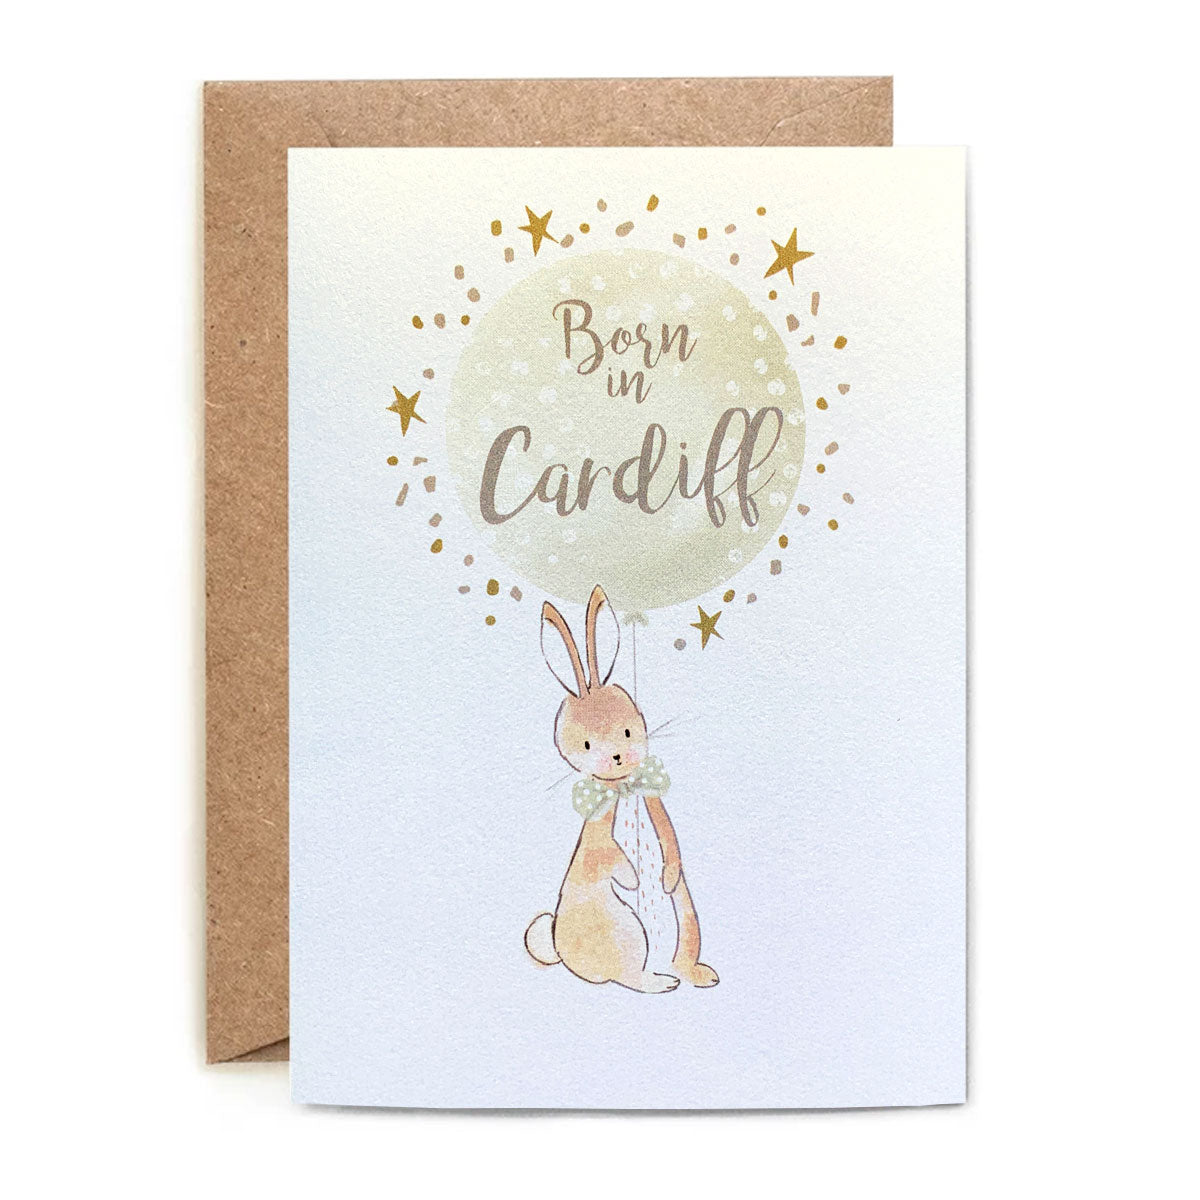 Born in Cardiff New Baby Card